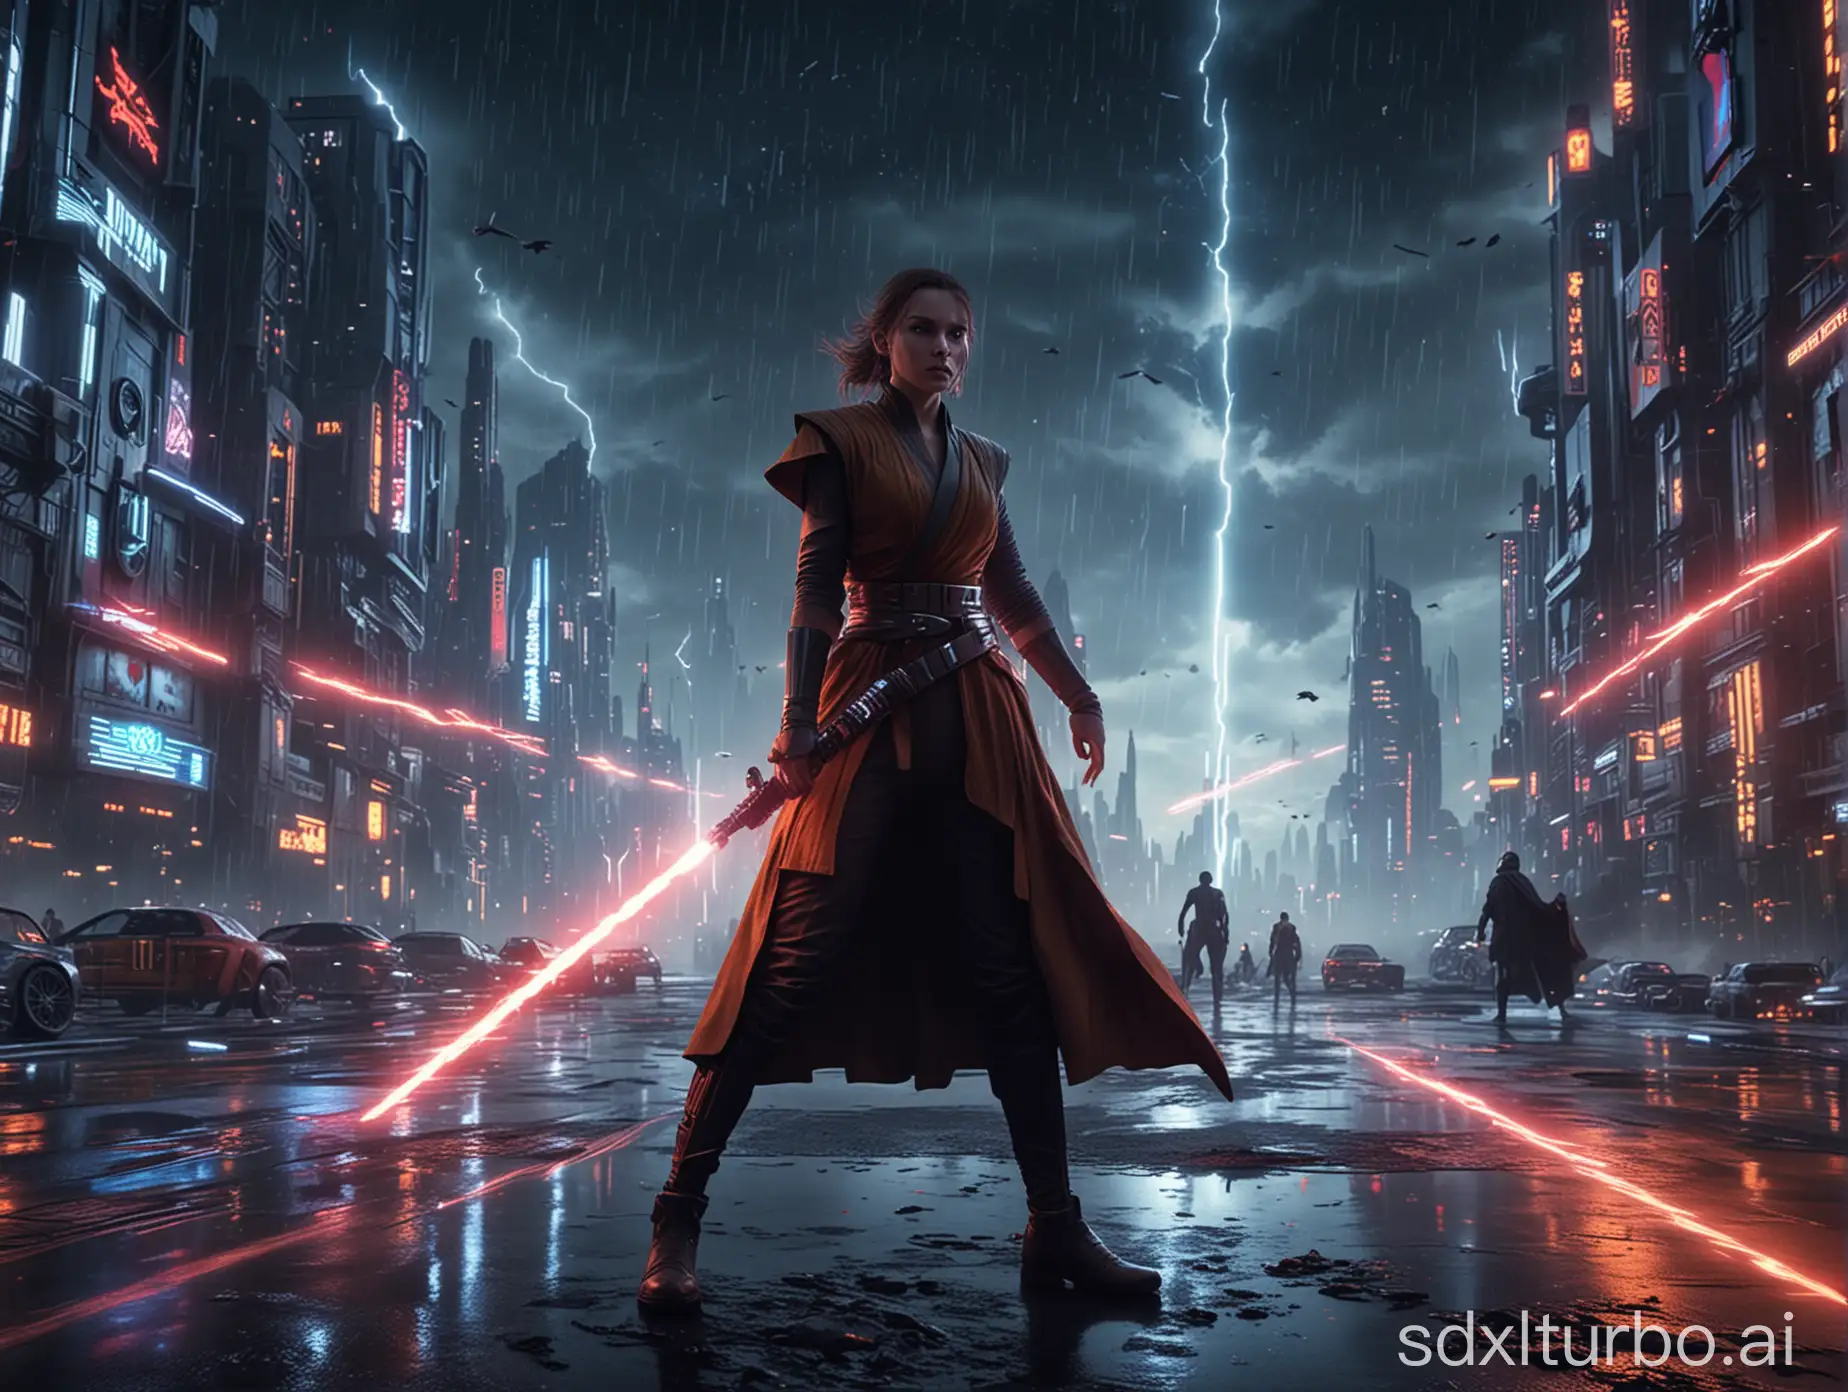 star wars, jedi, in action, a lightsaber, lightning bolts shooting from hands, future city at night, neon ads, motion blur, 8k, ultra realistic, highly detailed, landscape format